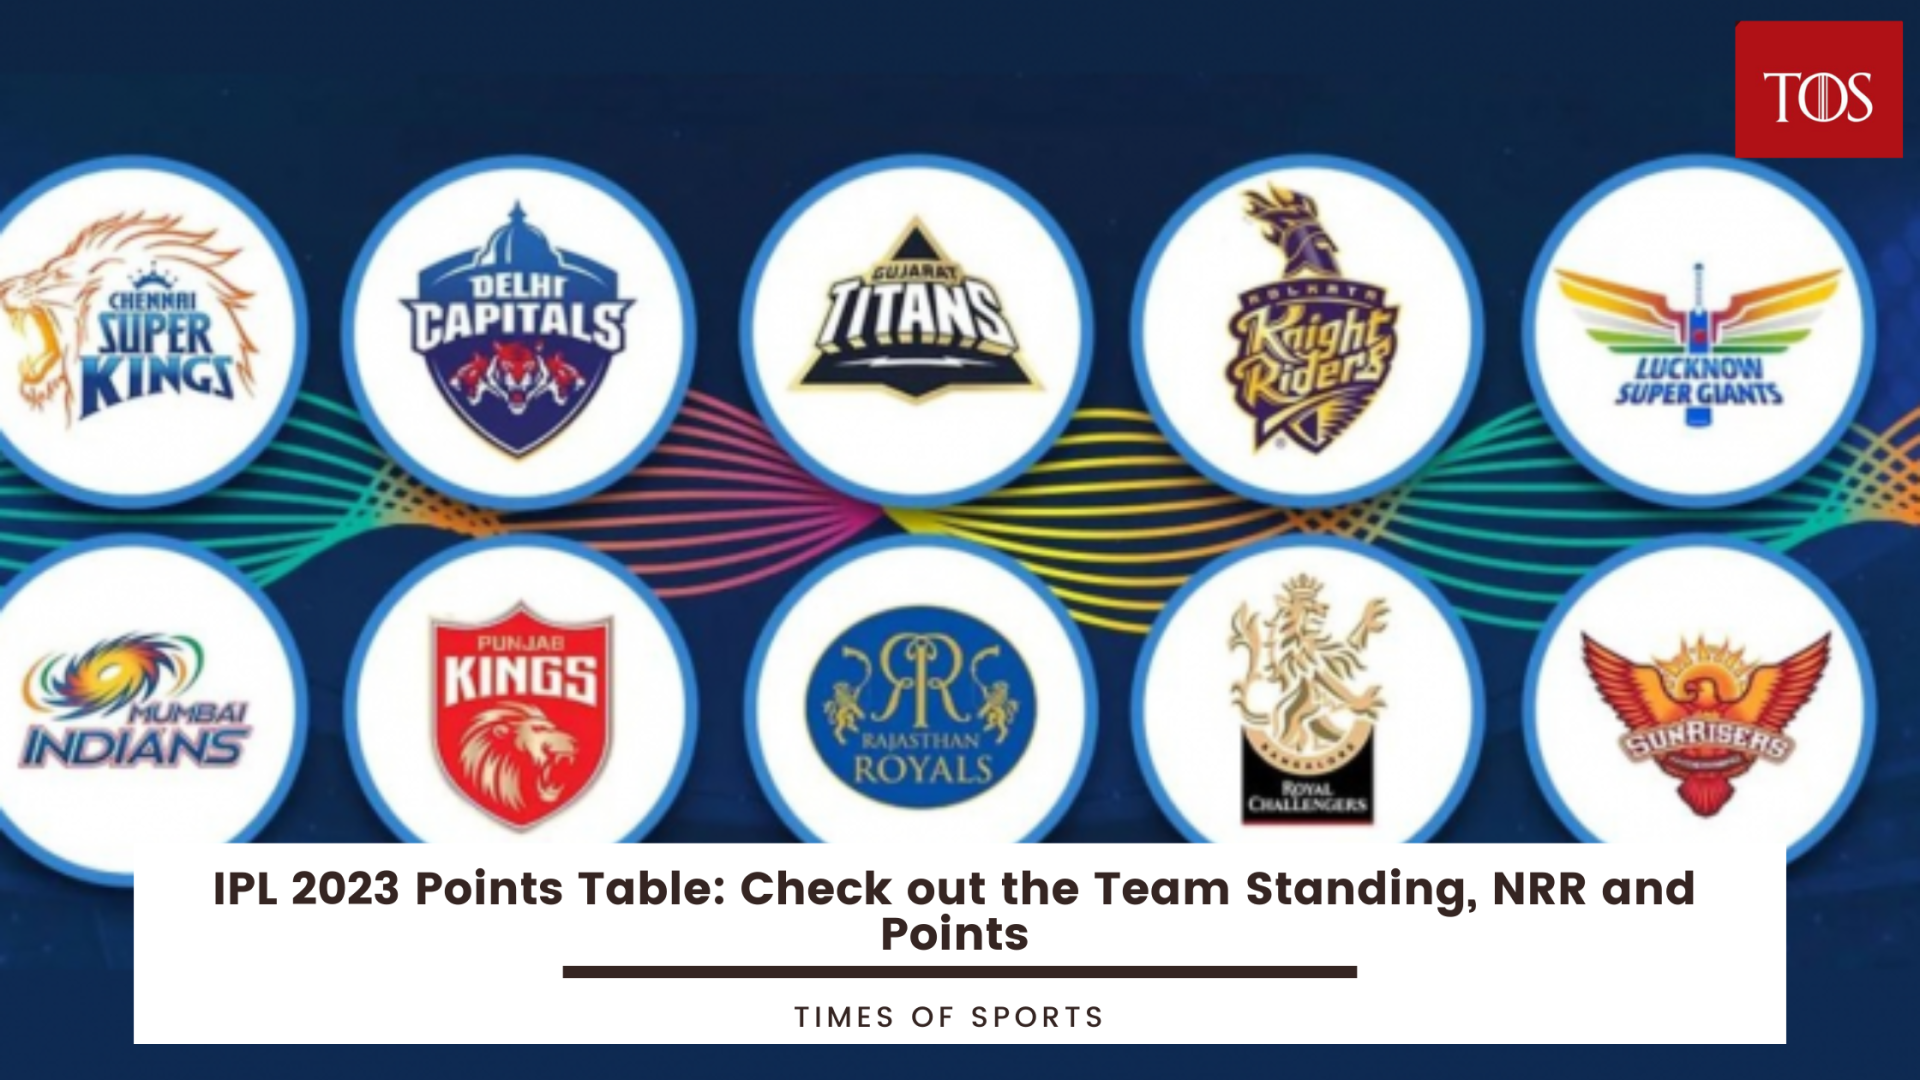 IPL 2023 Points Table Team Standing, NRR and Points